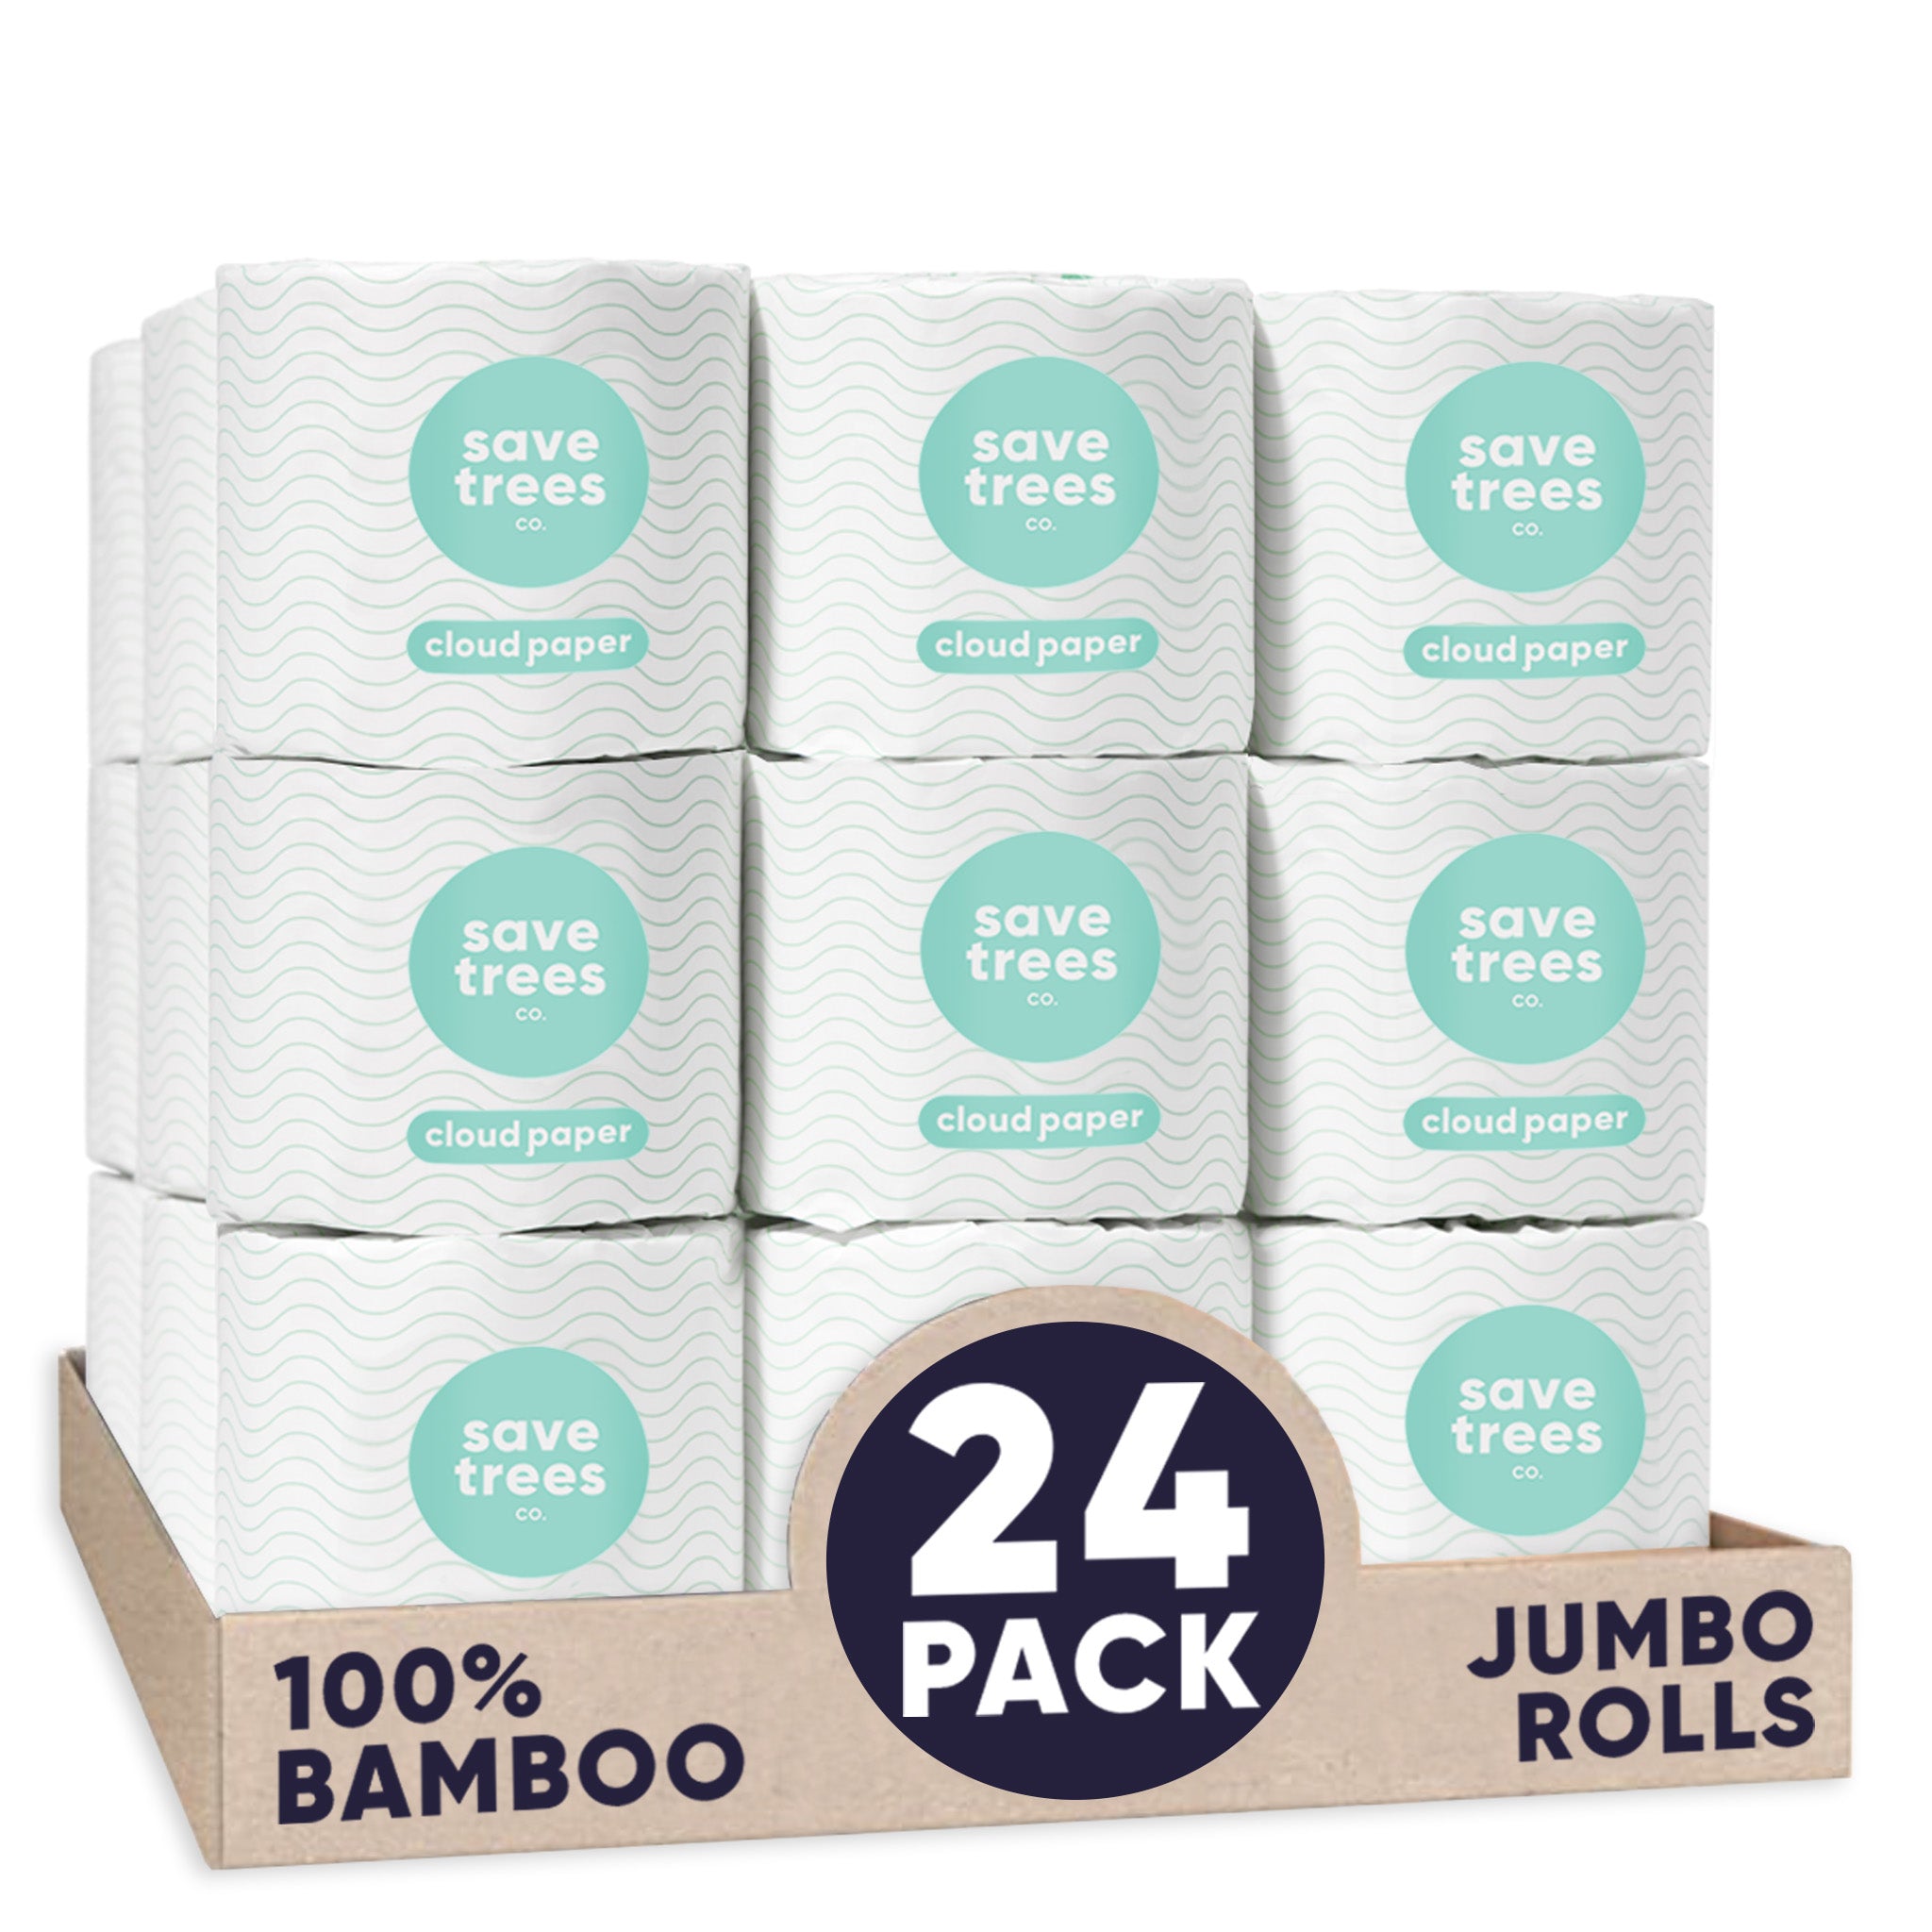 Bamboo Tissues - 12 Boxes of 100% Bamboo Facial Tissues – Cloud Paper